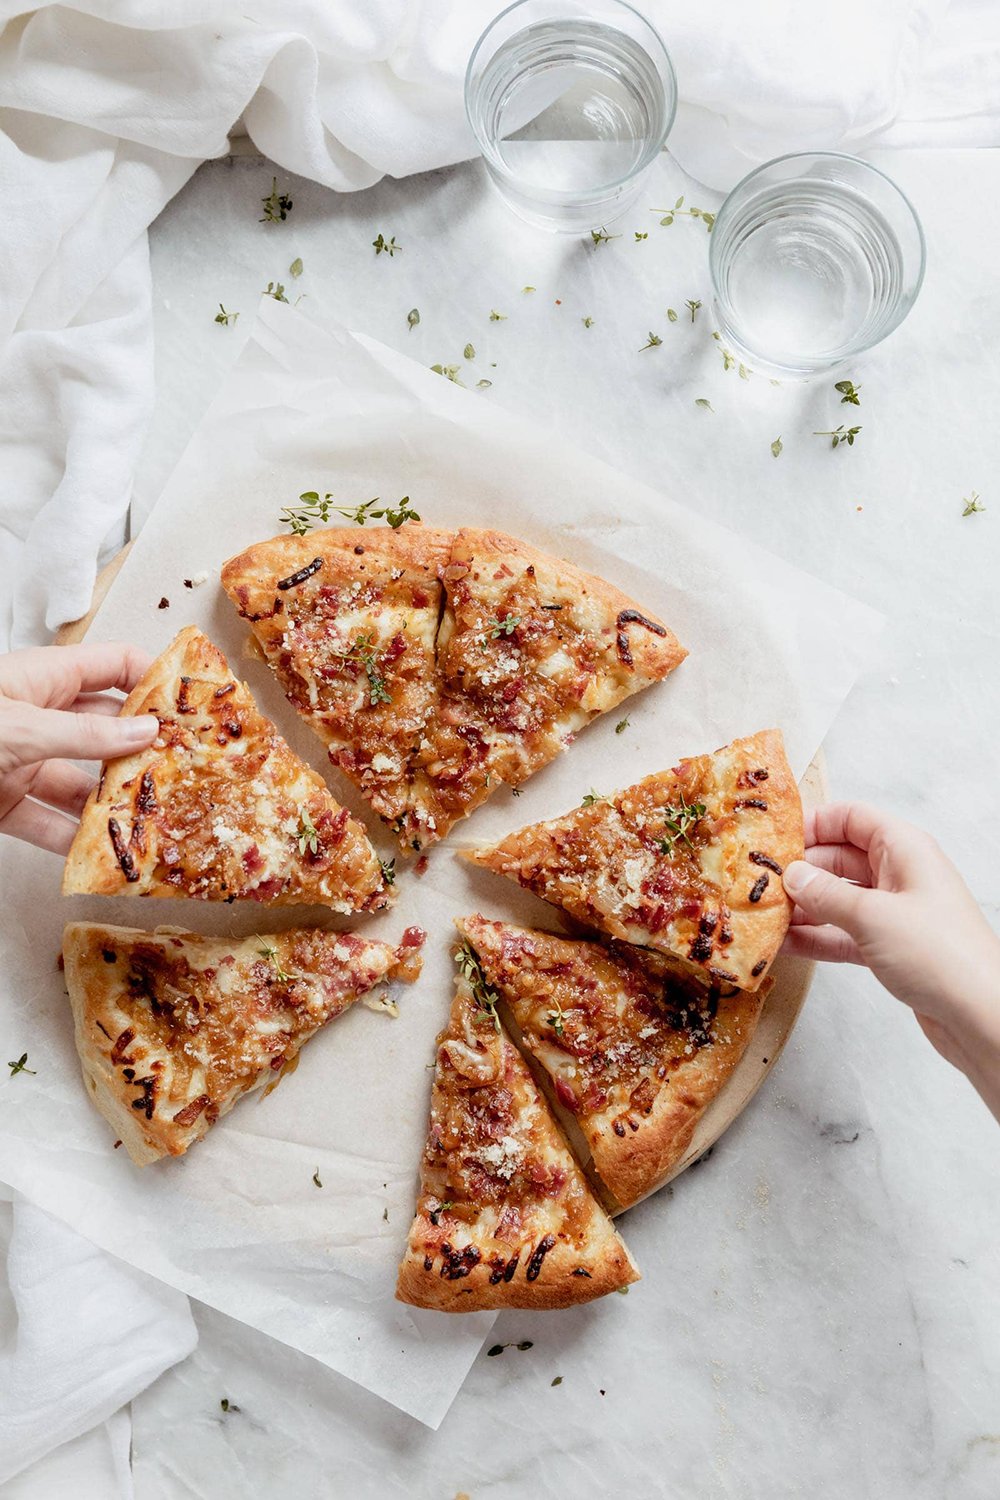 12 Homemade Pizza & Flatbread Recipes To Try - roomfortuesday.com